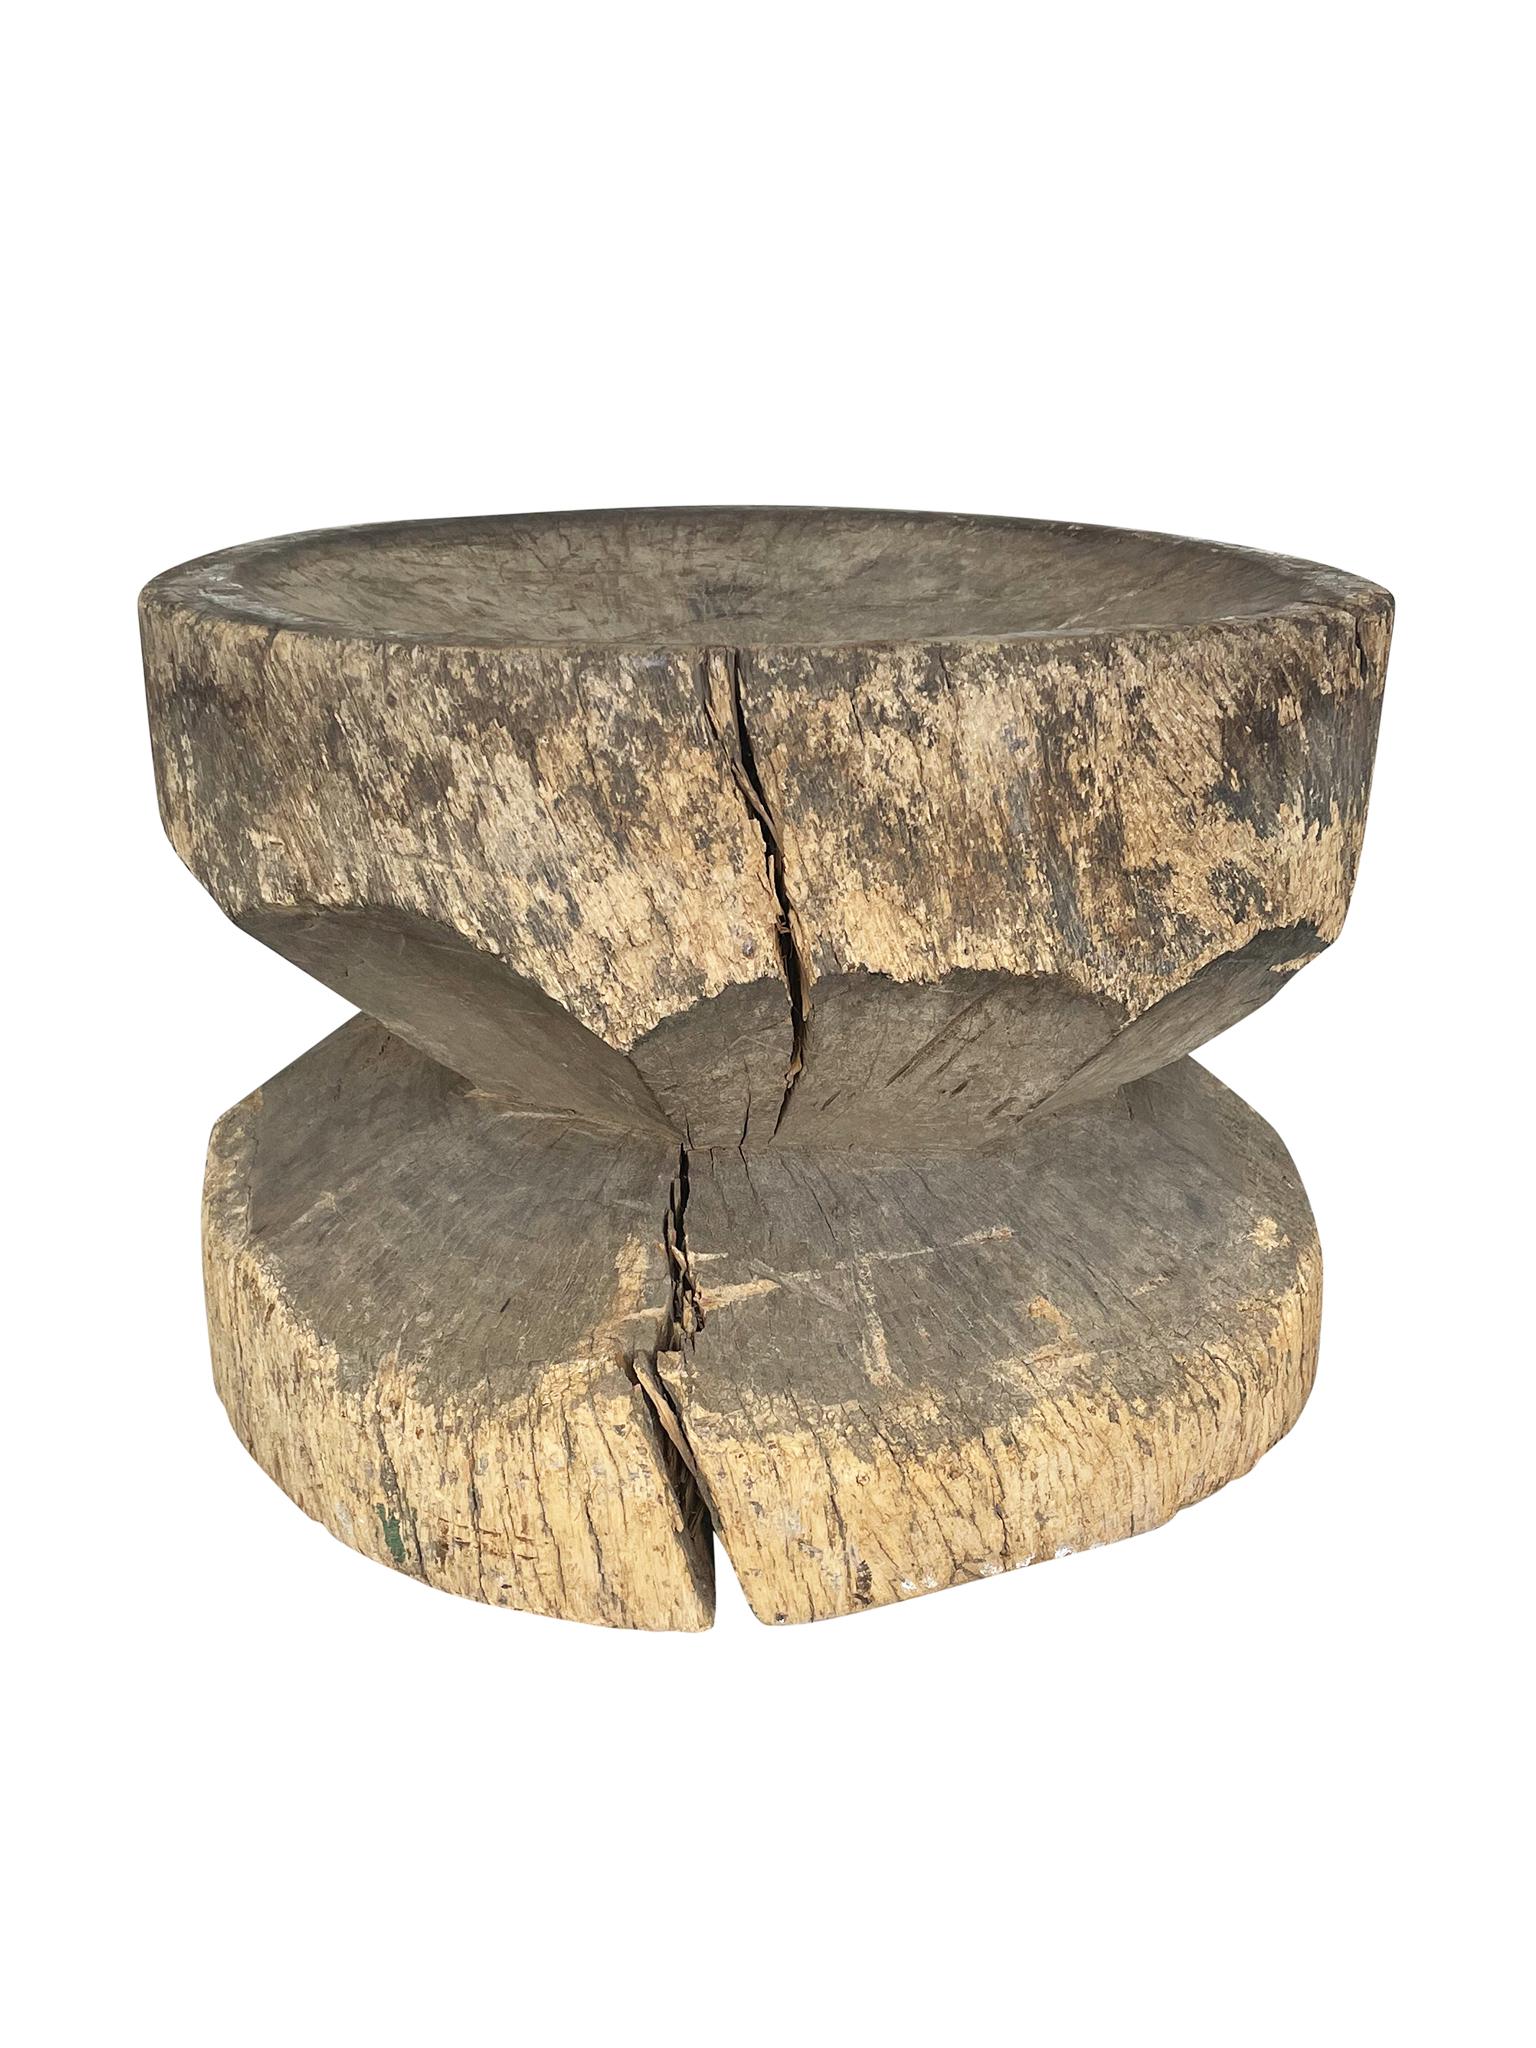 This round side table was hand-carved in the 20th century. We love its richly textured, hewn surface and the wood's organic properties.

Dimensions:
23.5 in. diameter
17.5 in. height

Condition notes:
In good condition, with natural splitting